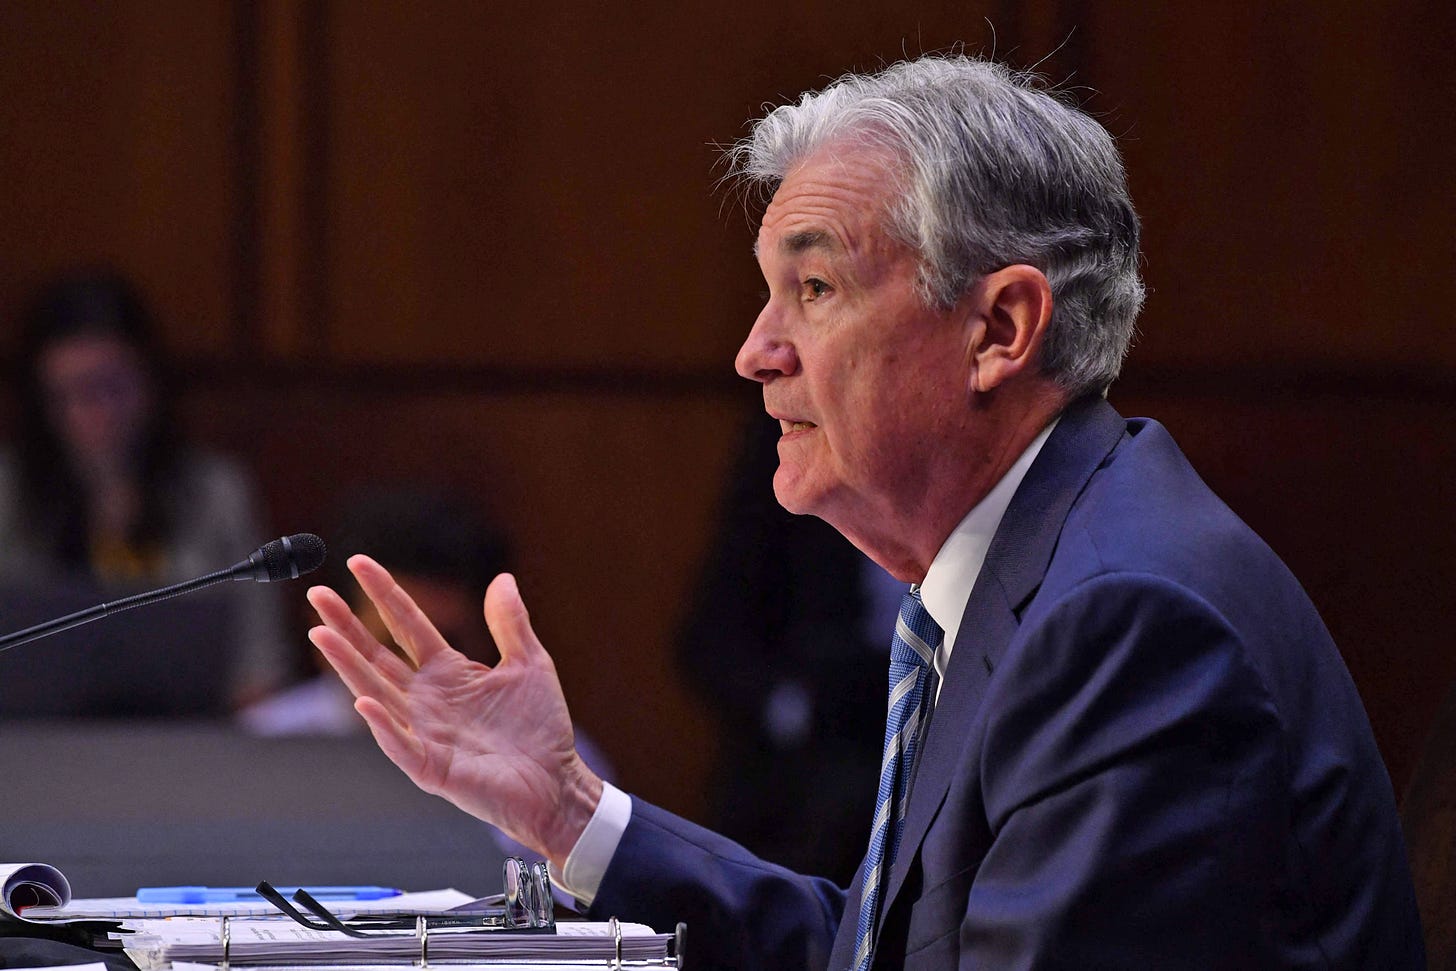 Fed chair Jerome Powell plans to continue interest rate hikes, which he  warns could lead to a recession